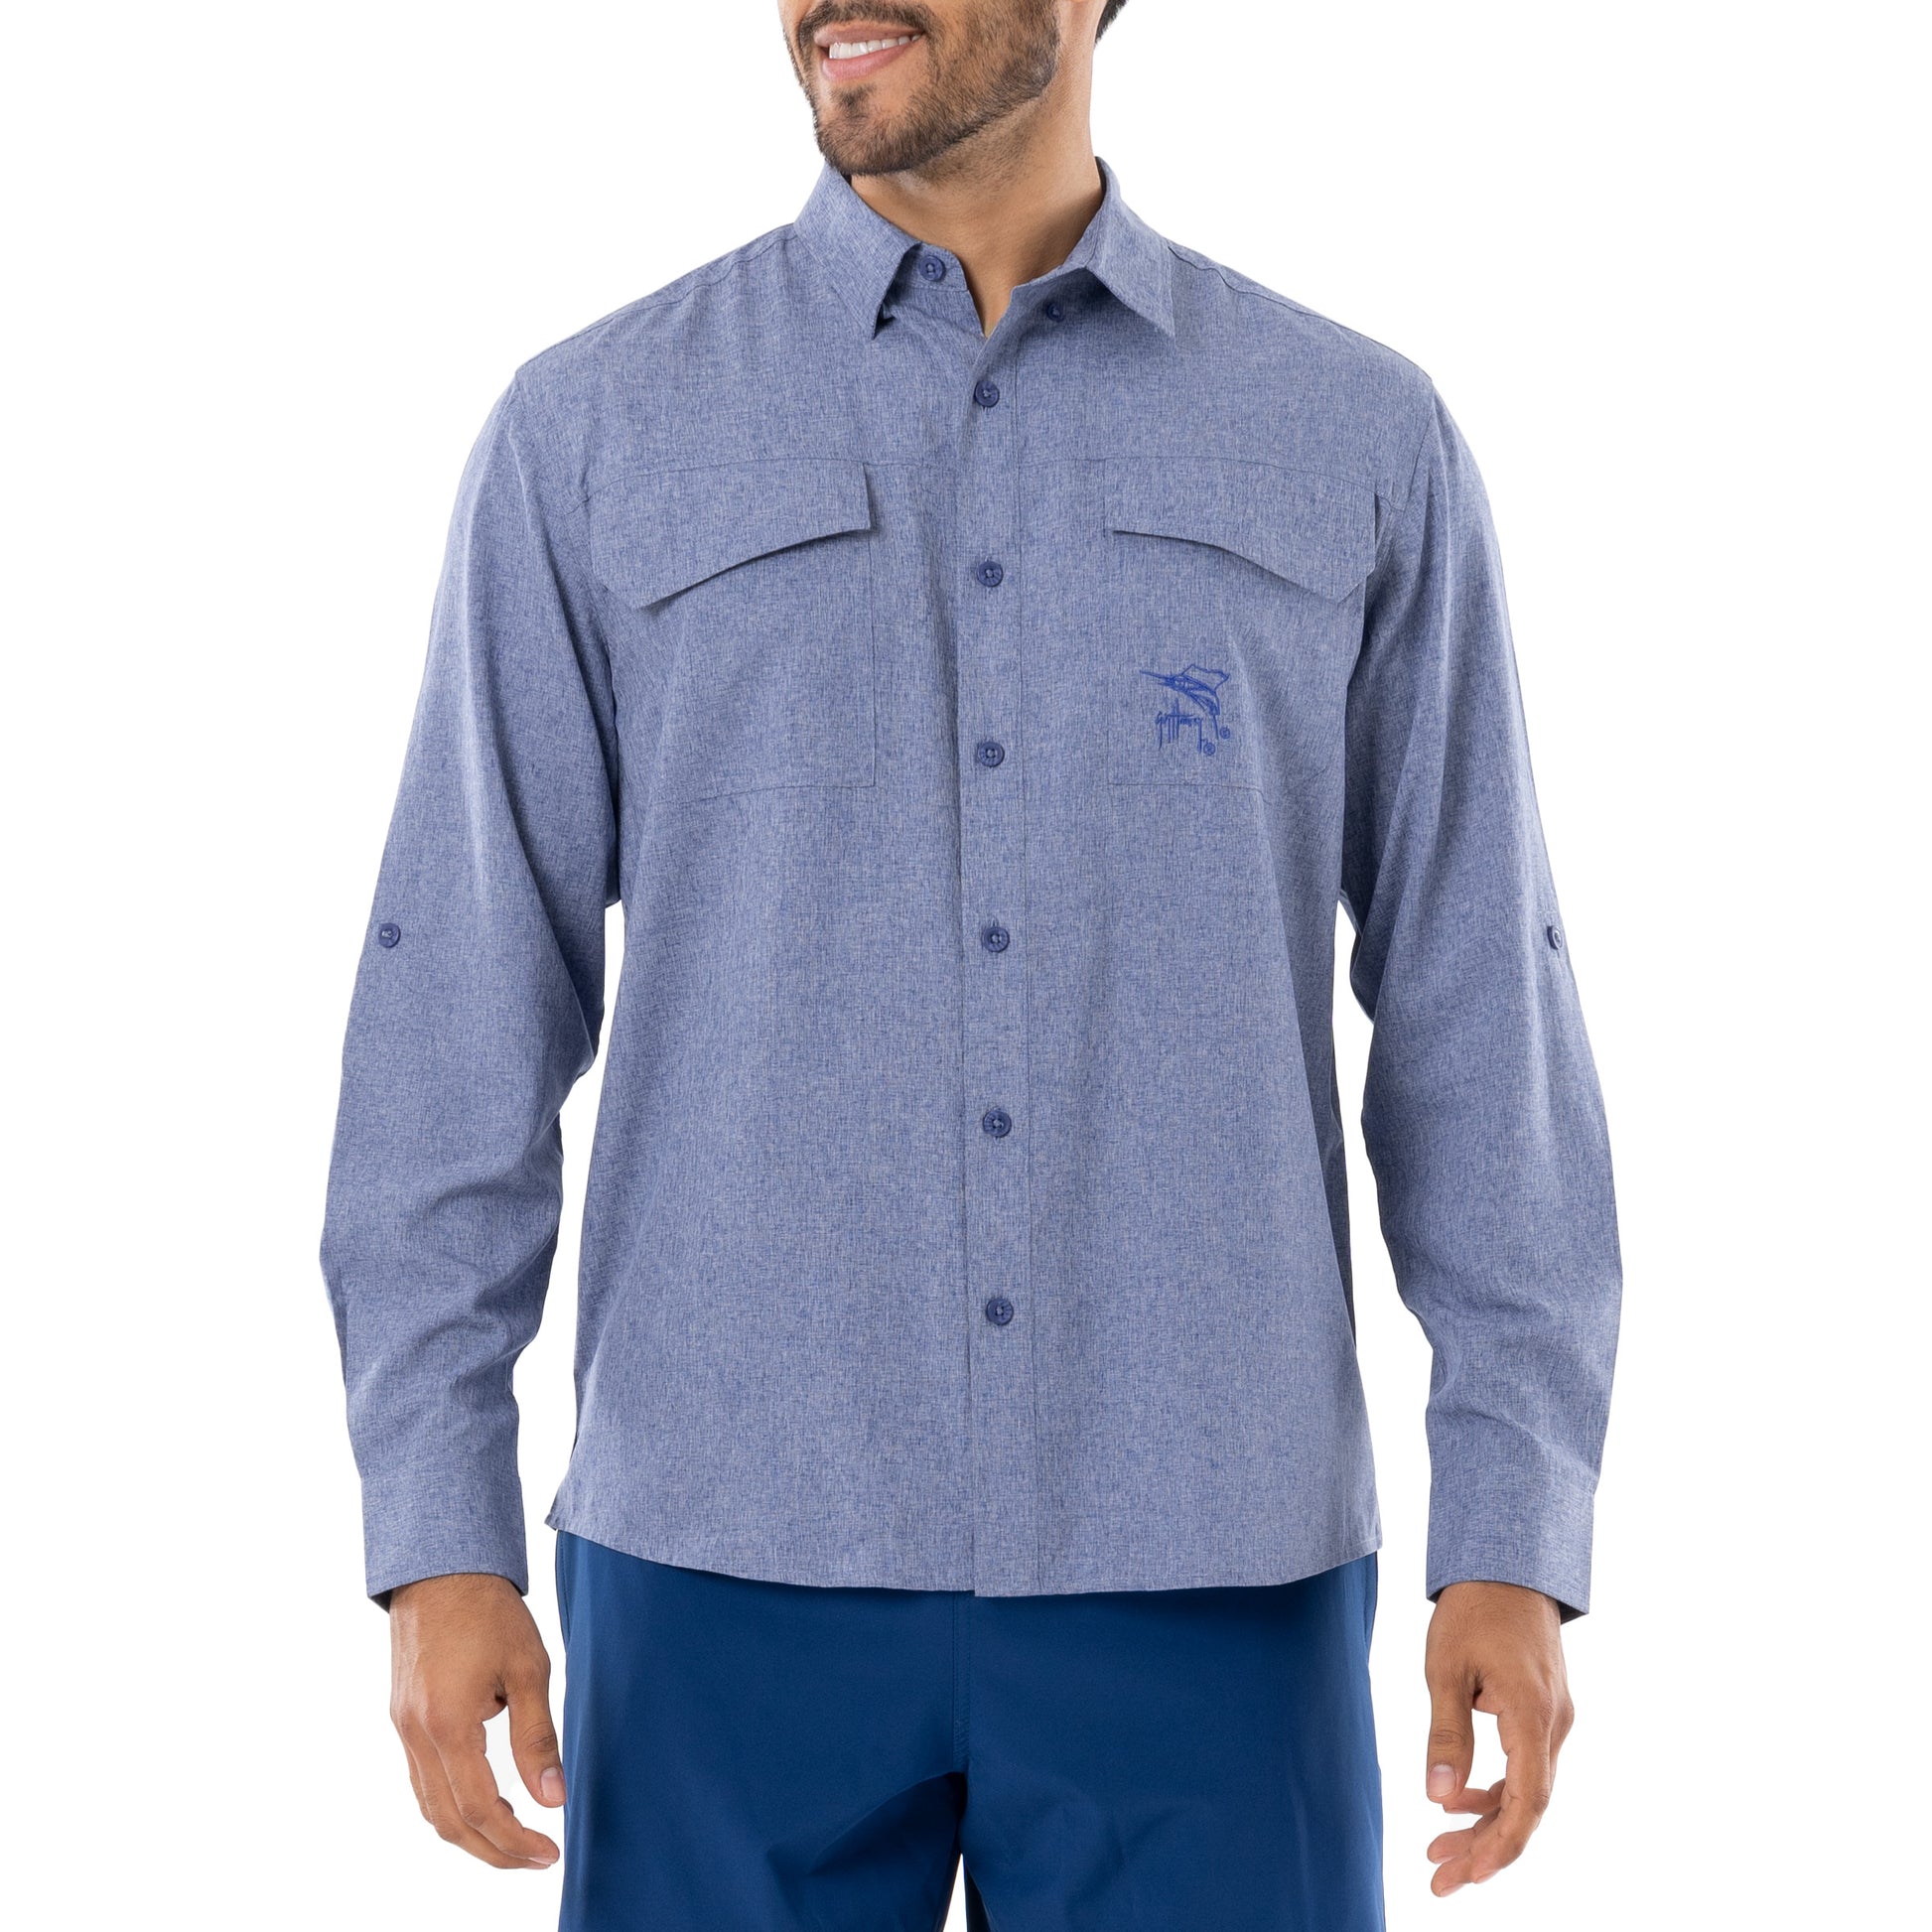  Under Armour Fishing Shirts For Men